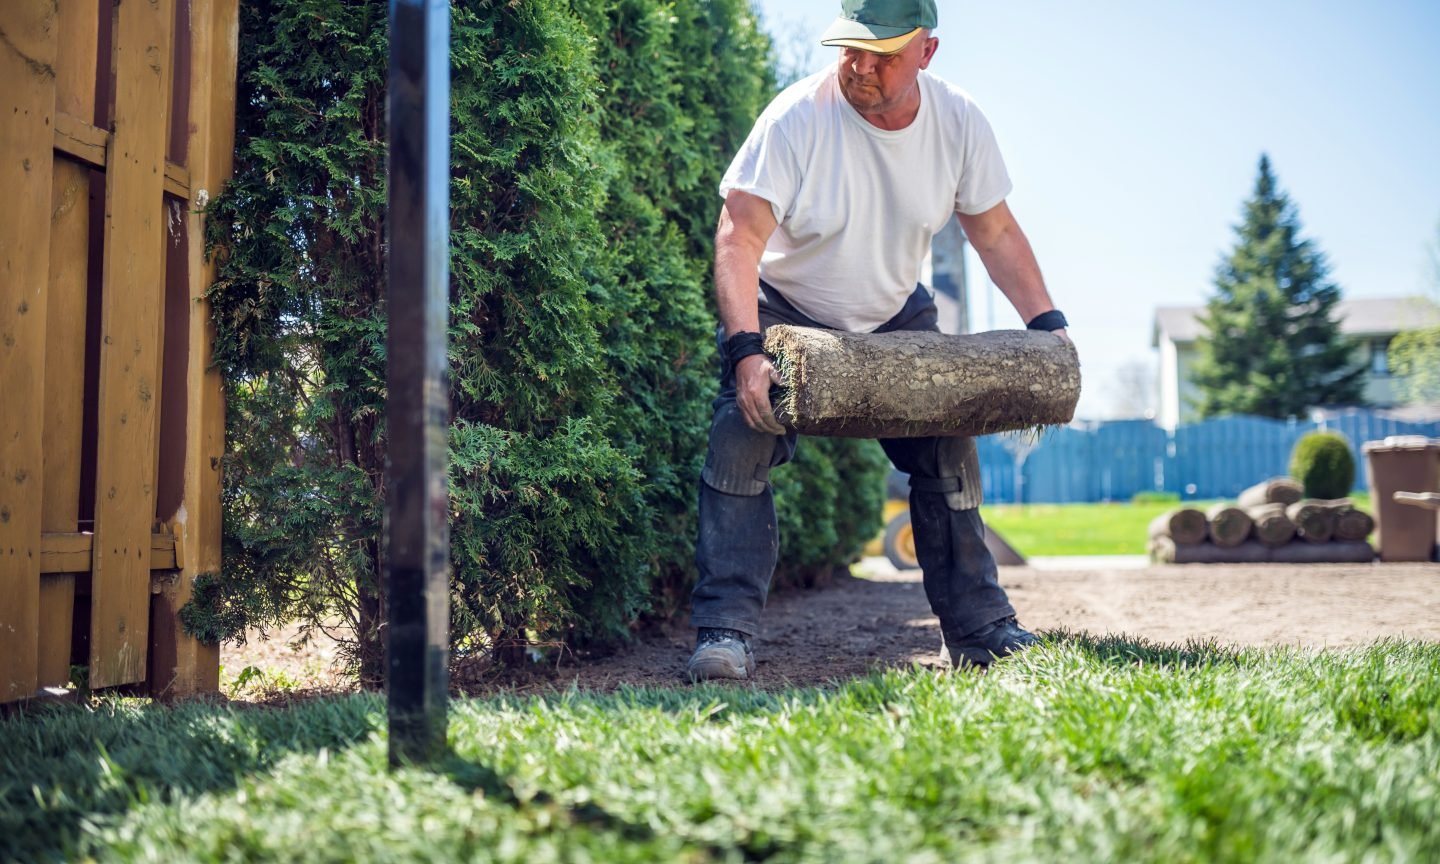 A Landscaping Or Lawn Care Business, How Much Do Landscapers Make An Hour